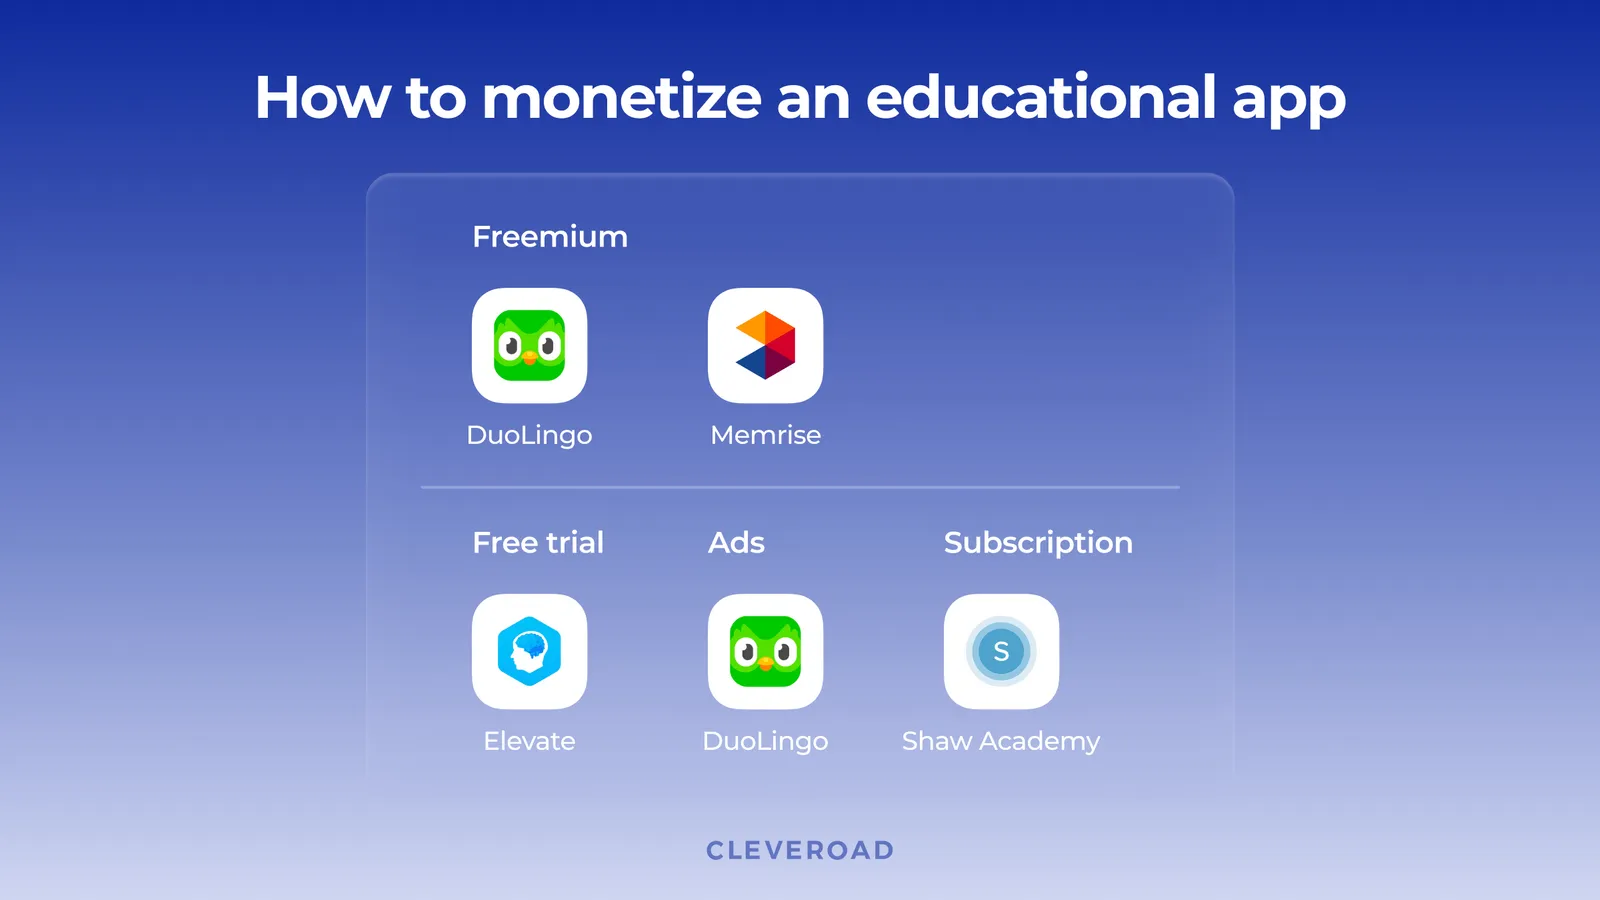 How to monetize an education app